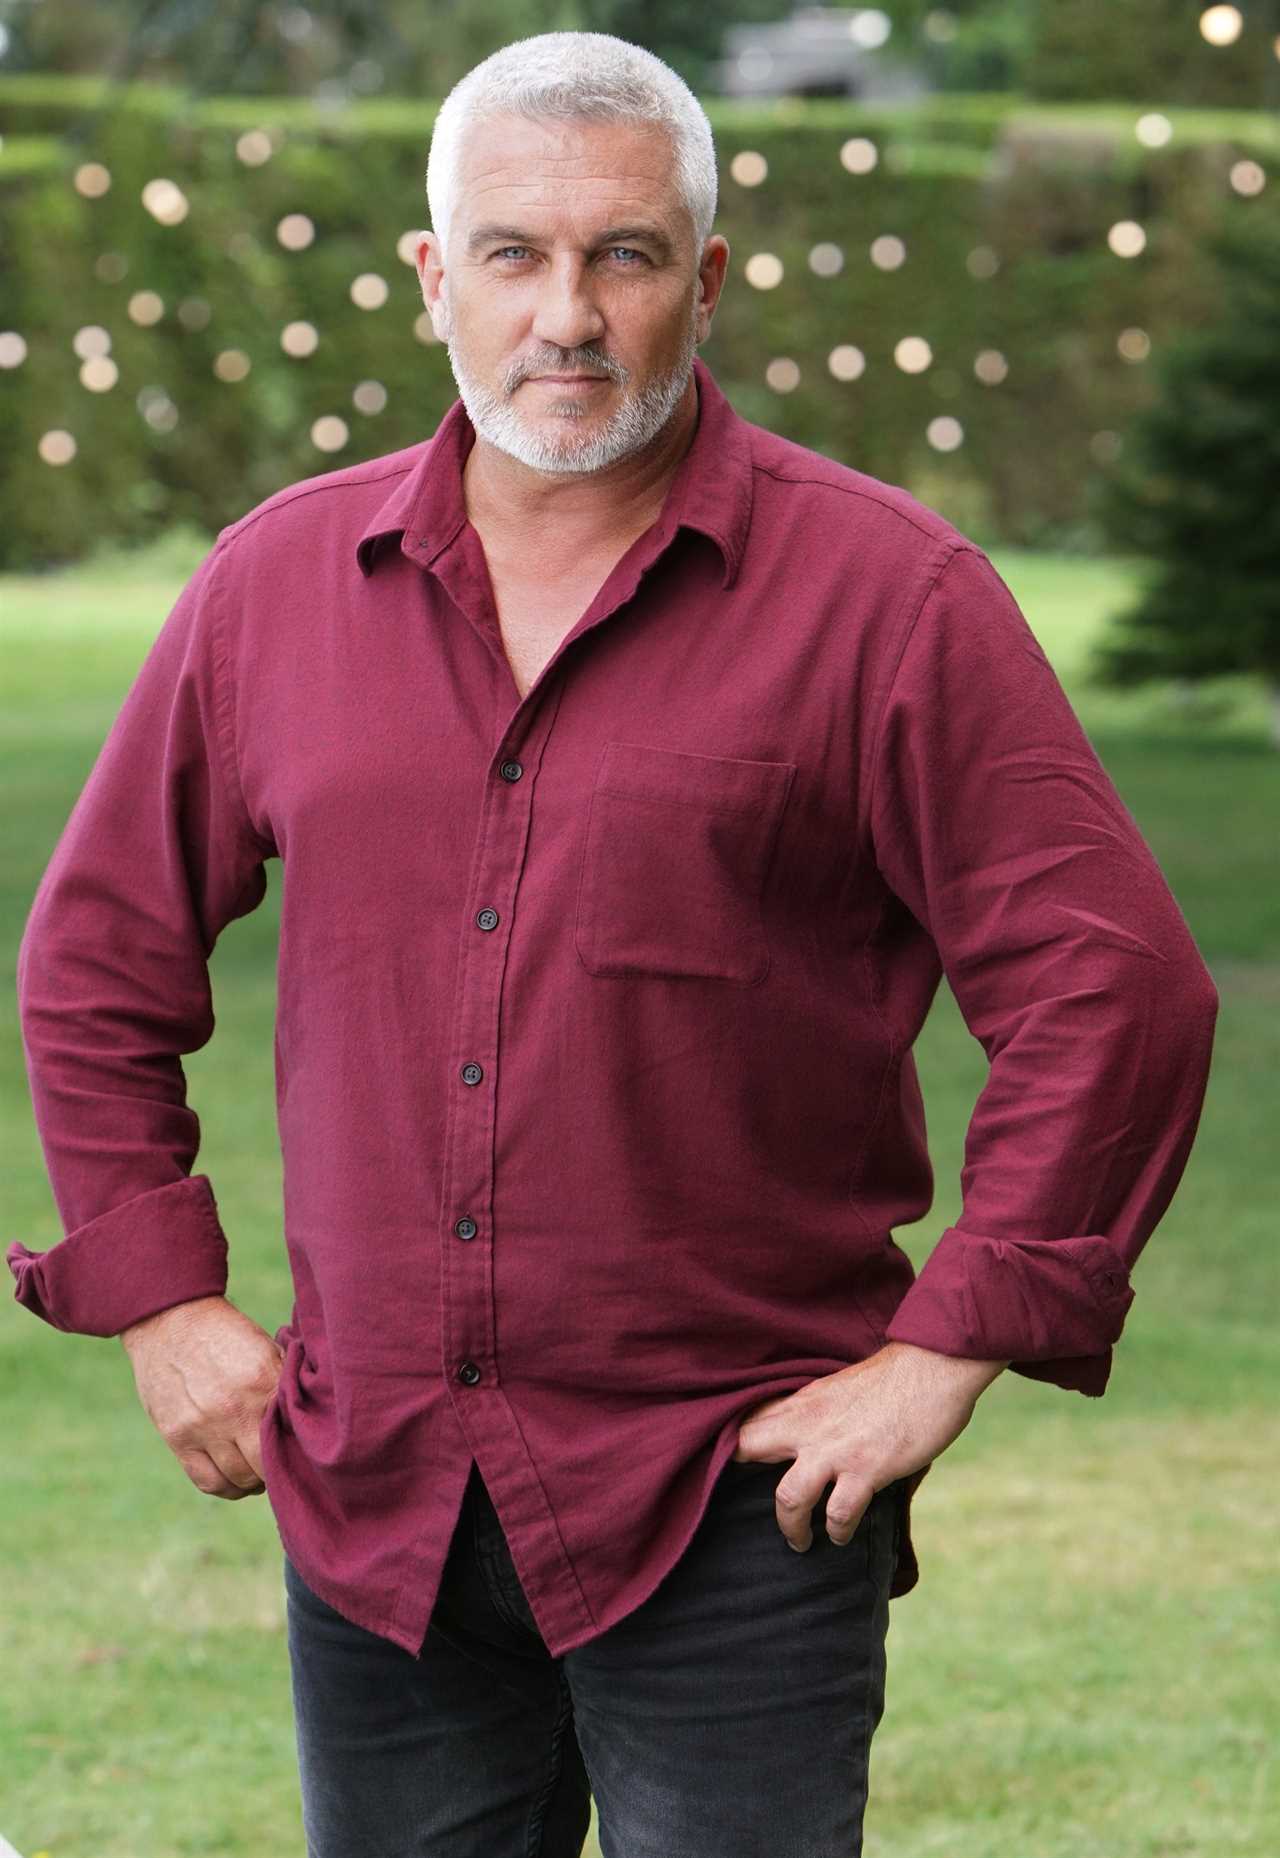 Bake Off’s Paul Hollywood reveals he lost a stone on a